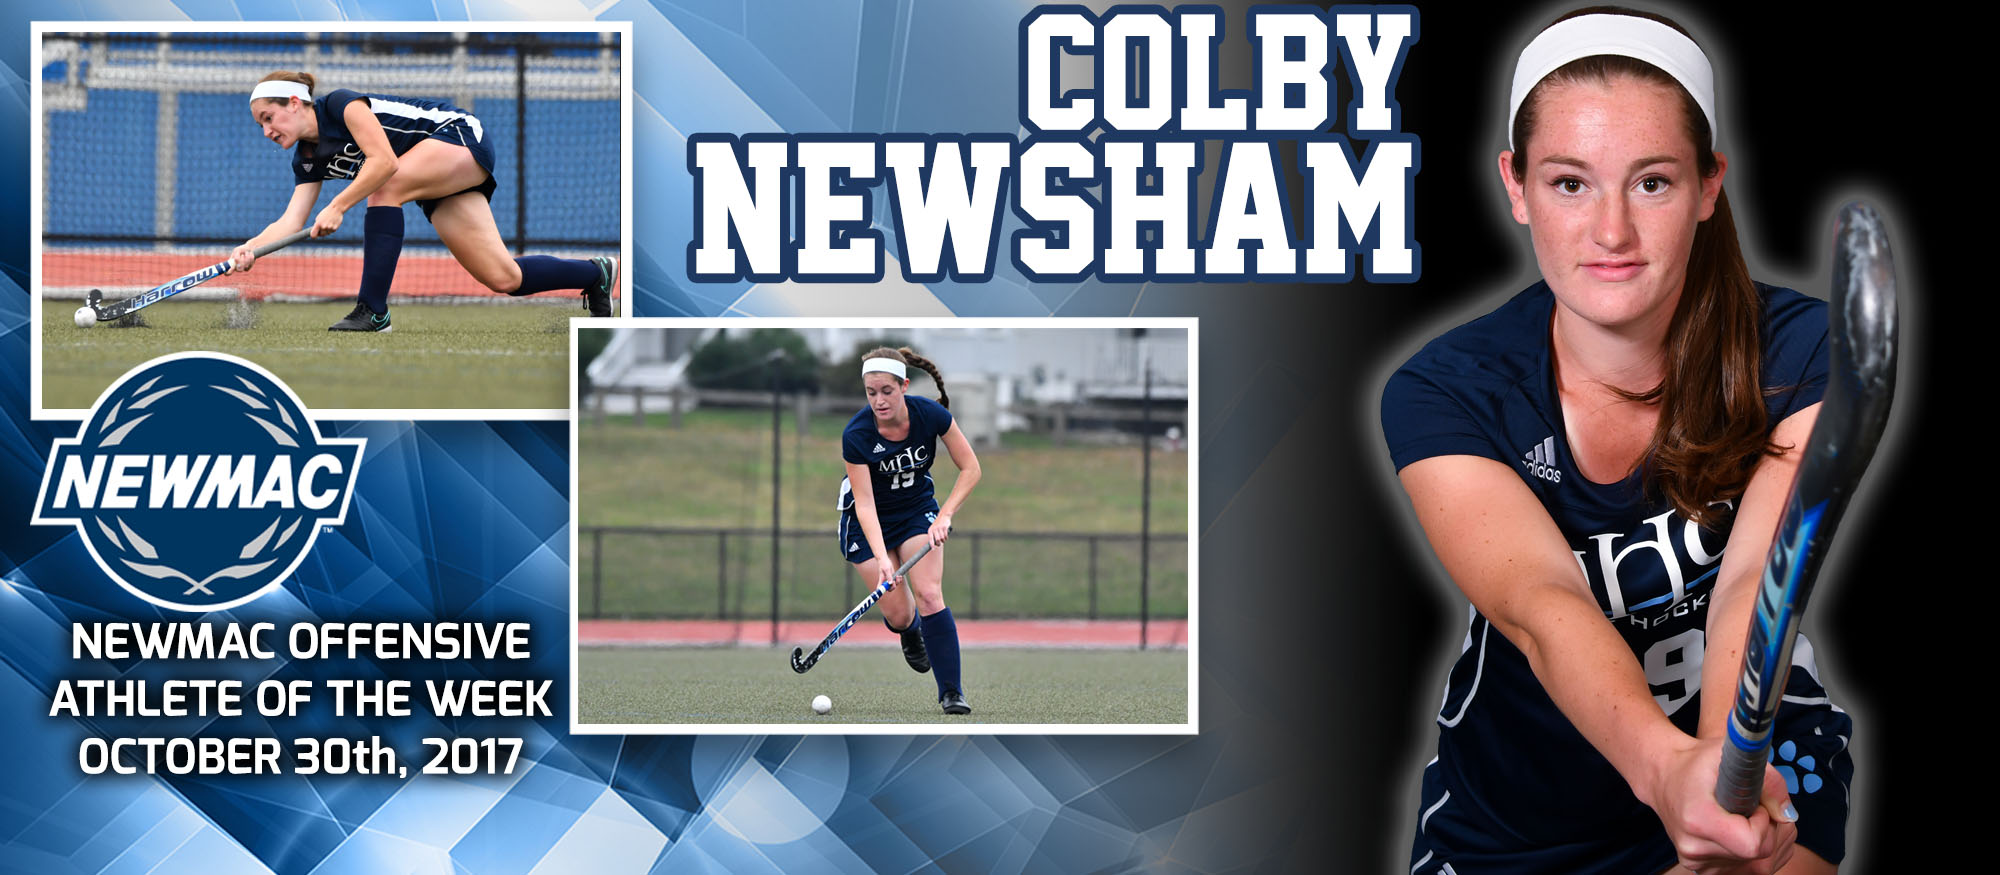 Photo of Colby Newsham who was named the NEWMAC Offensive Athlete of the Week for October 30th